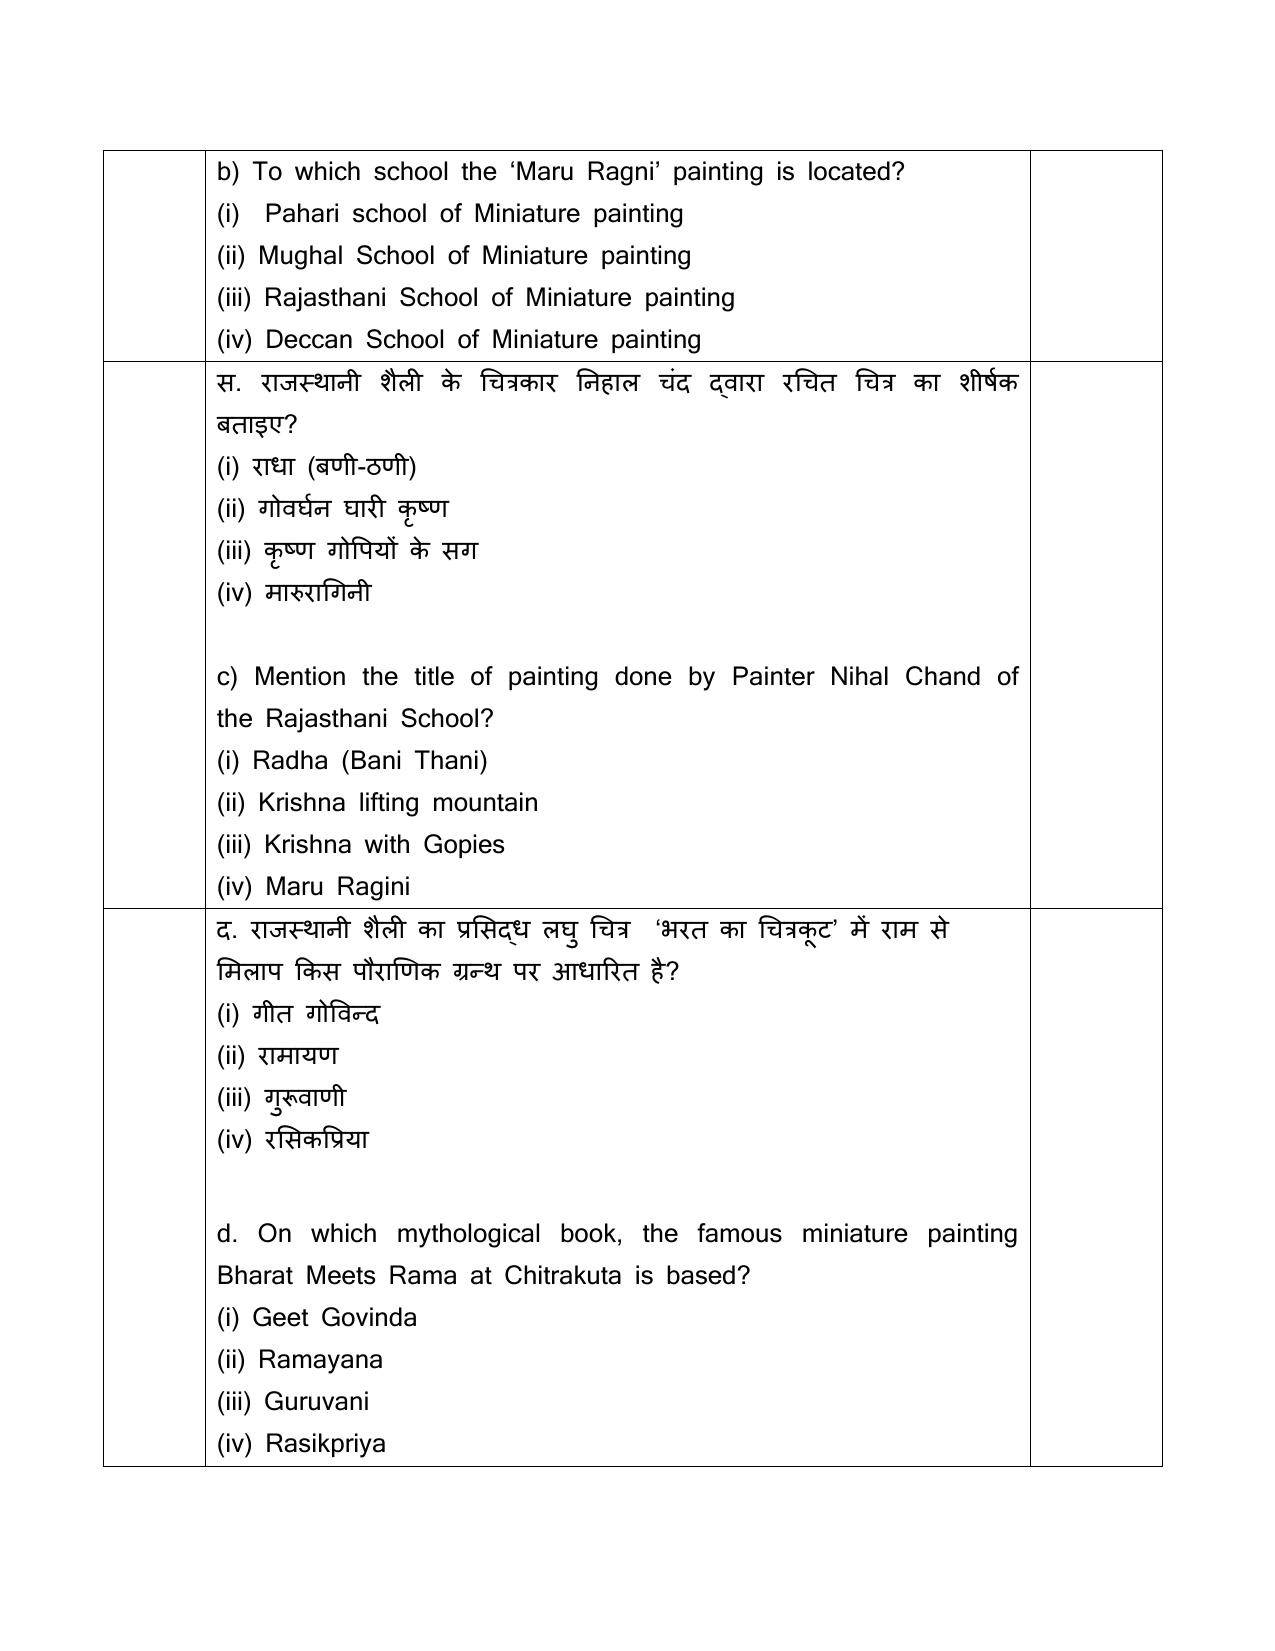 CBSE Class 12 Painting -Sample Paper 2019-20 - Page 2